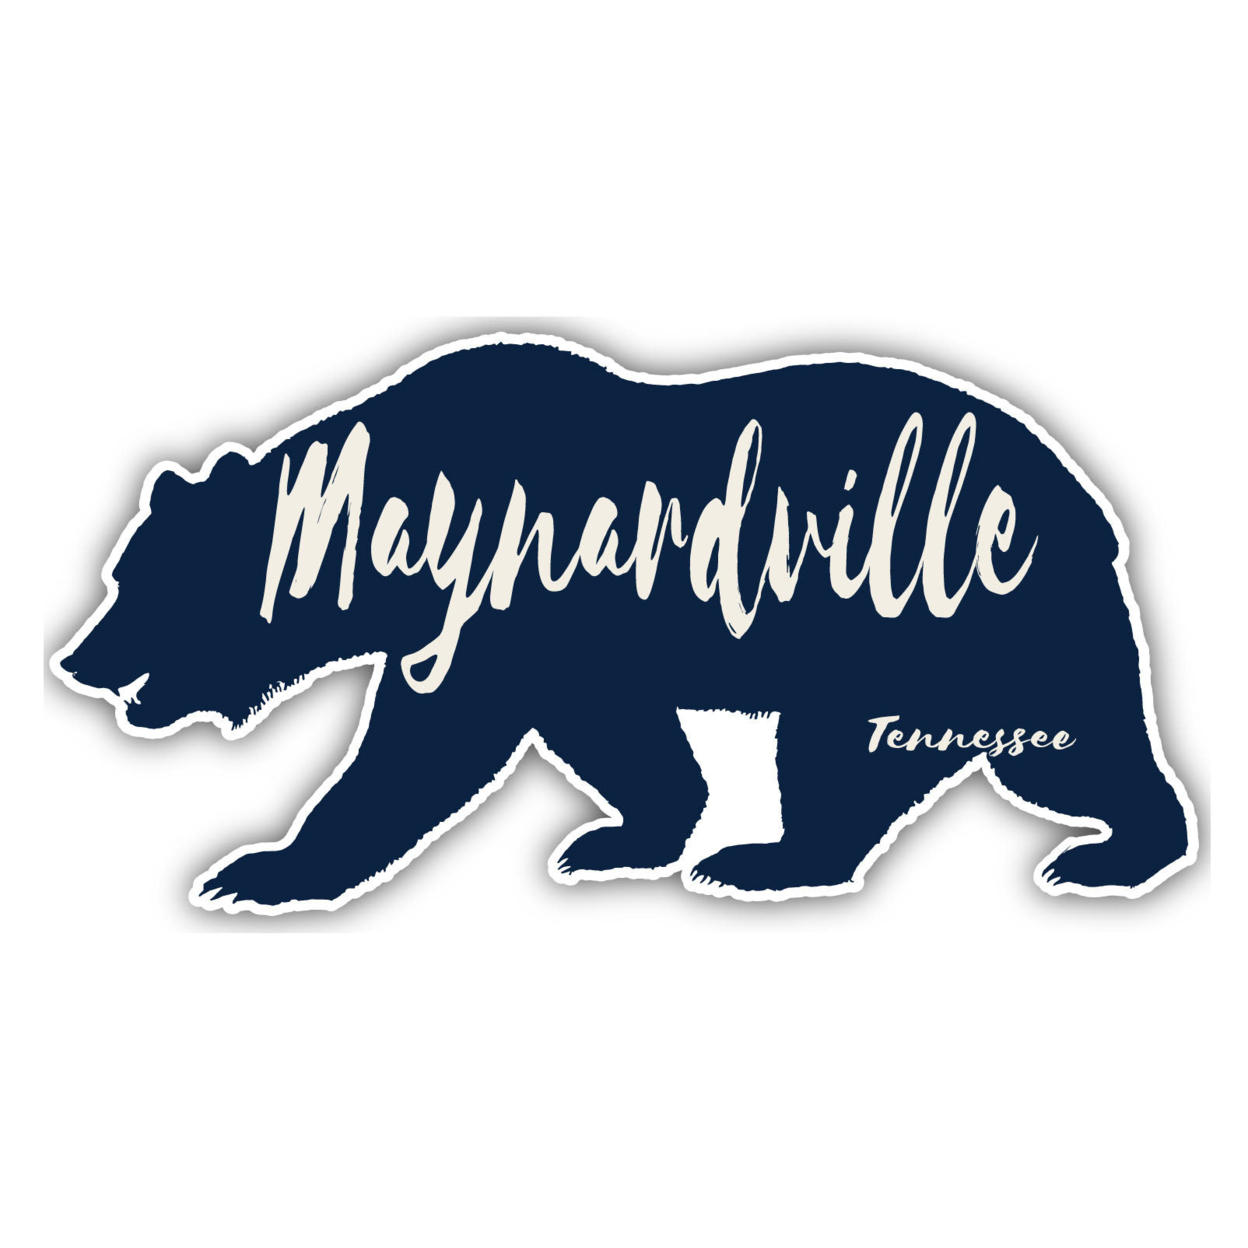 Maynardville Tennessee Souvenir Decorative Stickers (Choose Theme And Size) - 2-Inch, Bear